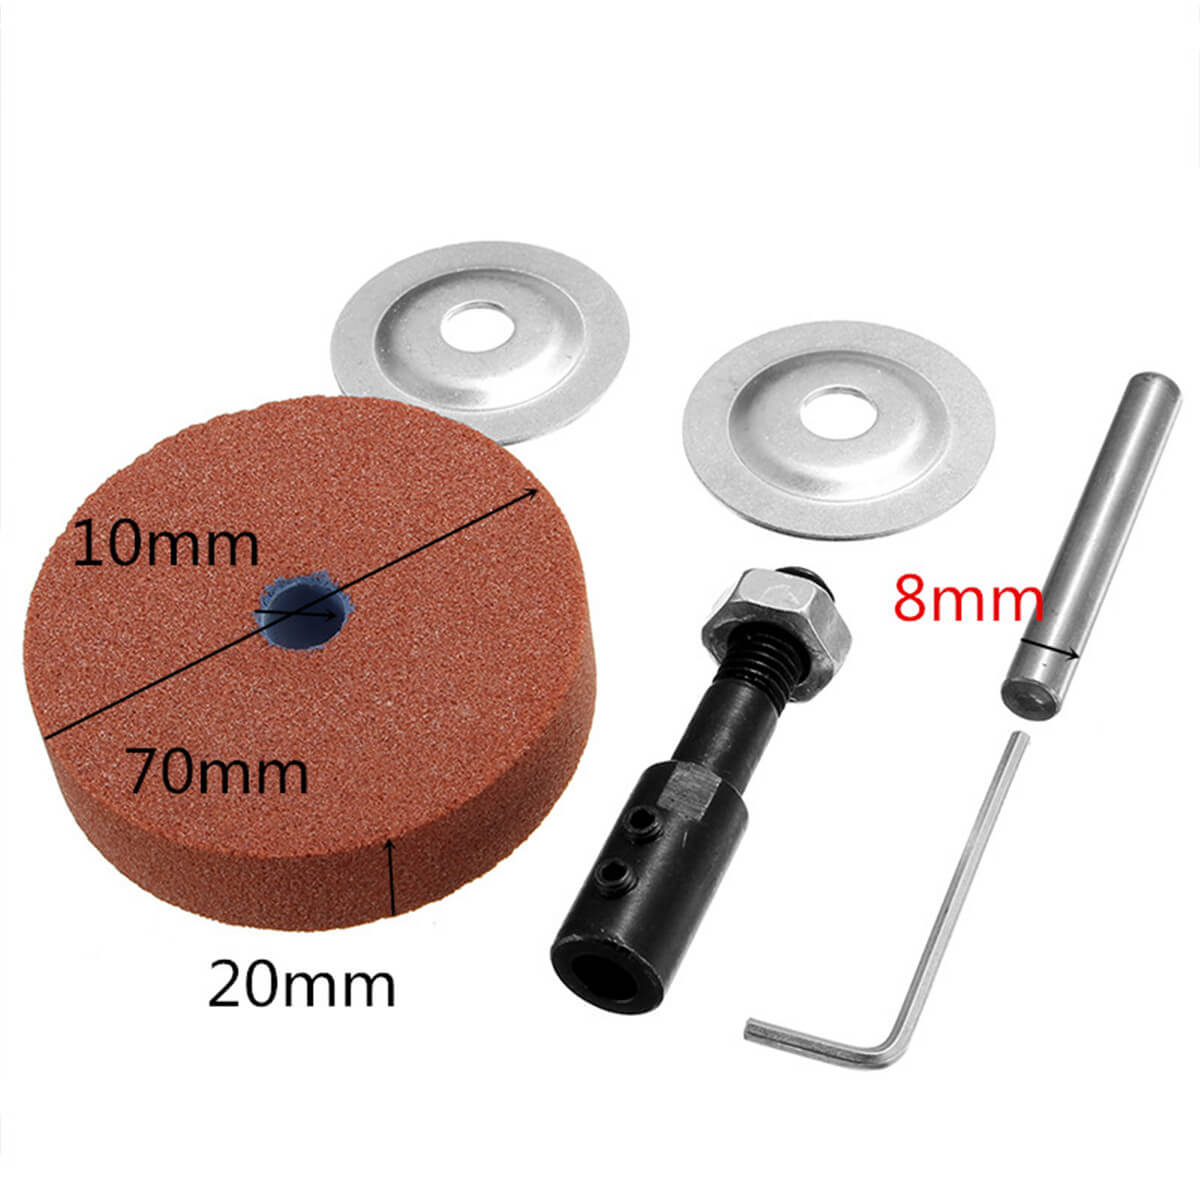 Drillpro Grinding Wheel Adapter Set 120-150 Grit For Electric Drill Change Grinding Wheel